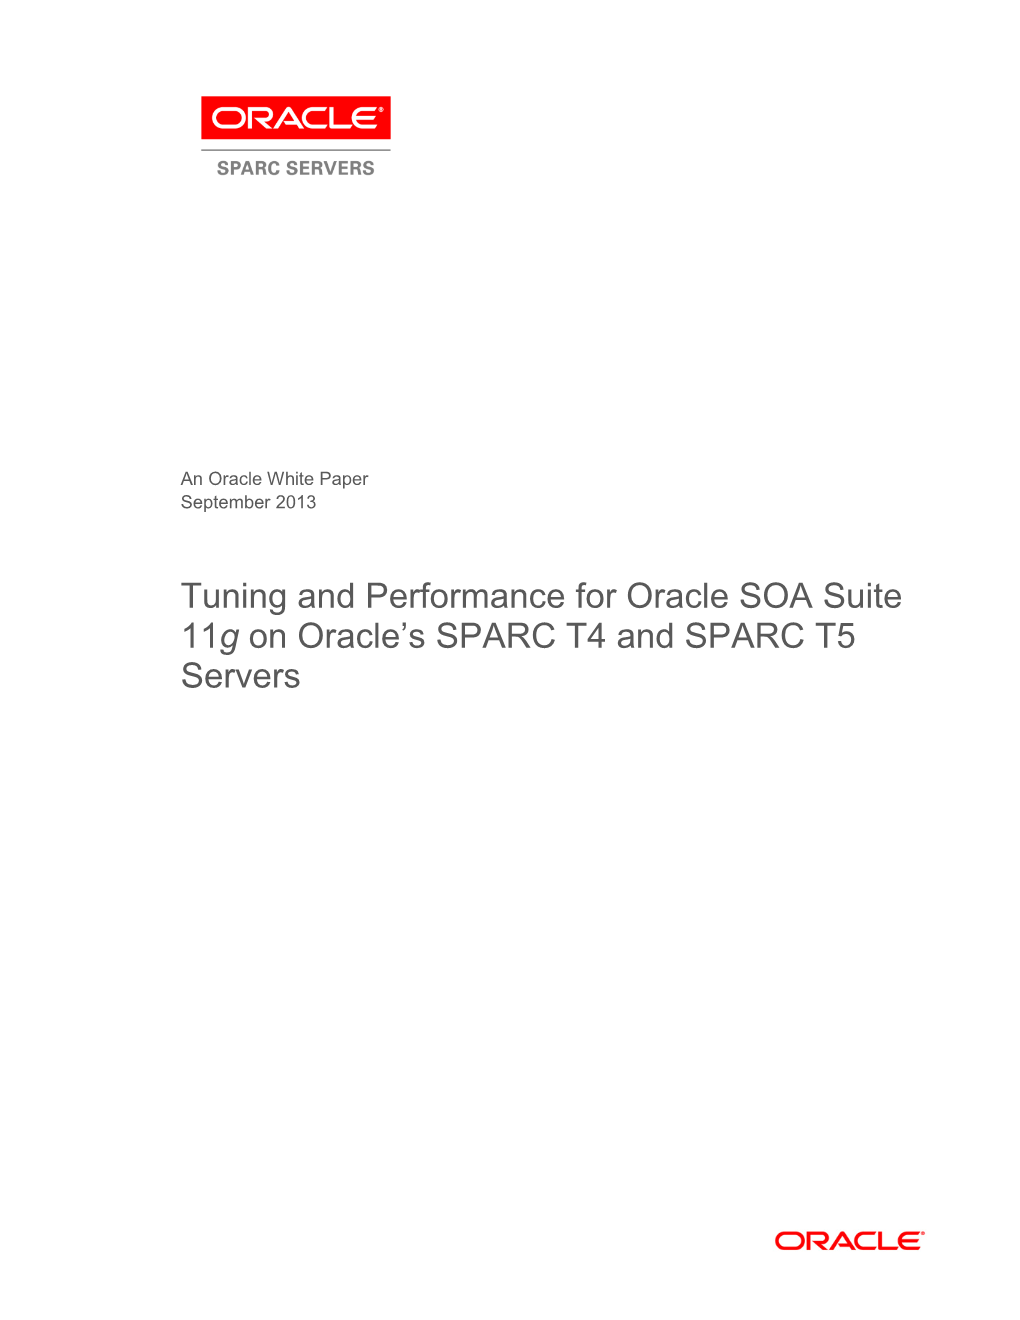 Tuning and Performance for Oracle SOA 11G on SPARC T4 Hardware